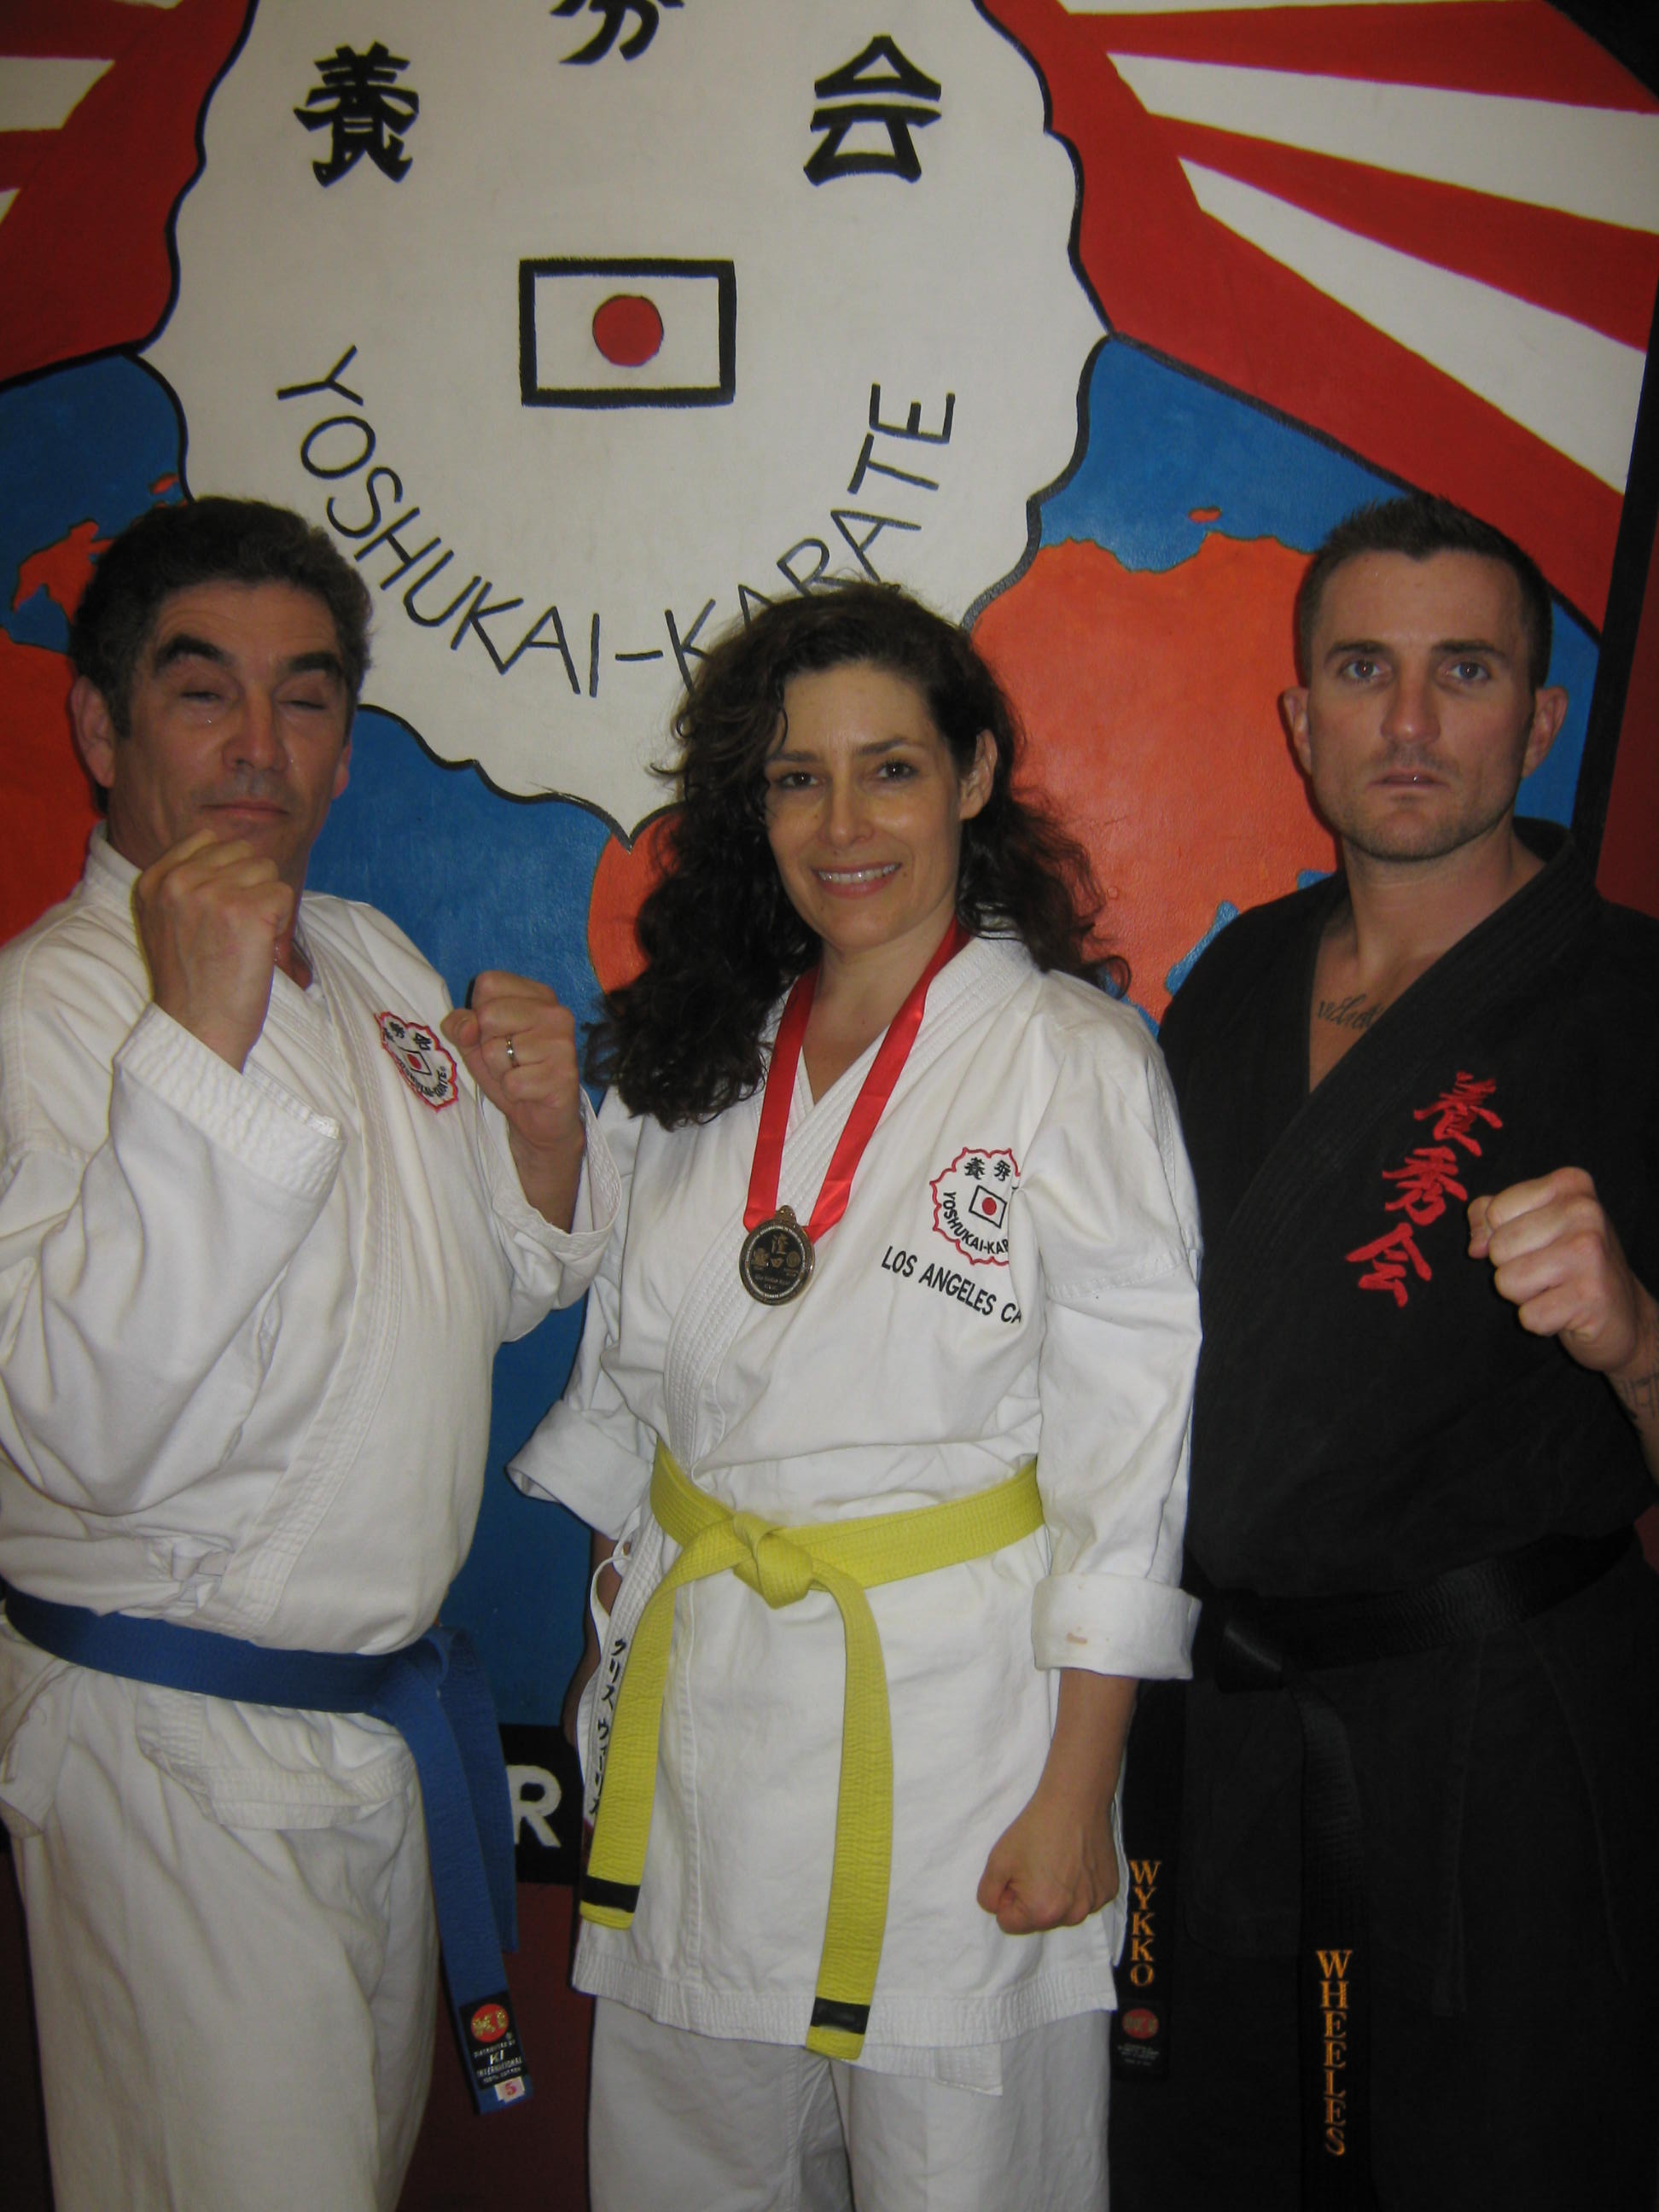 Tamar Springer with fellow Kata winners Carl Fredlin (left) and Chris Wheeles (right) at the 45th annual All-Star Karate Tournament.